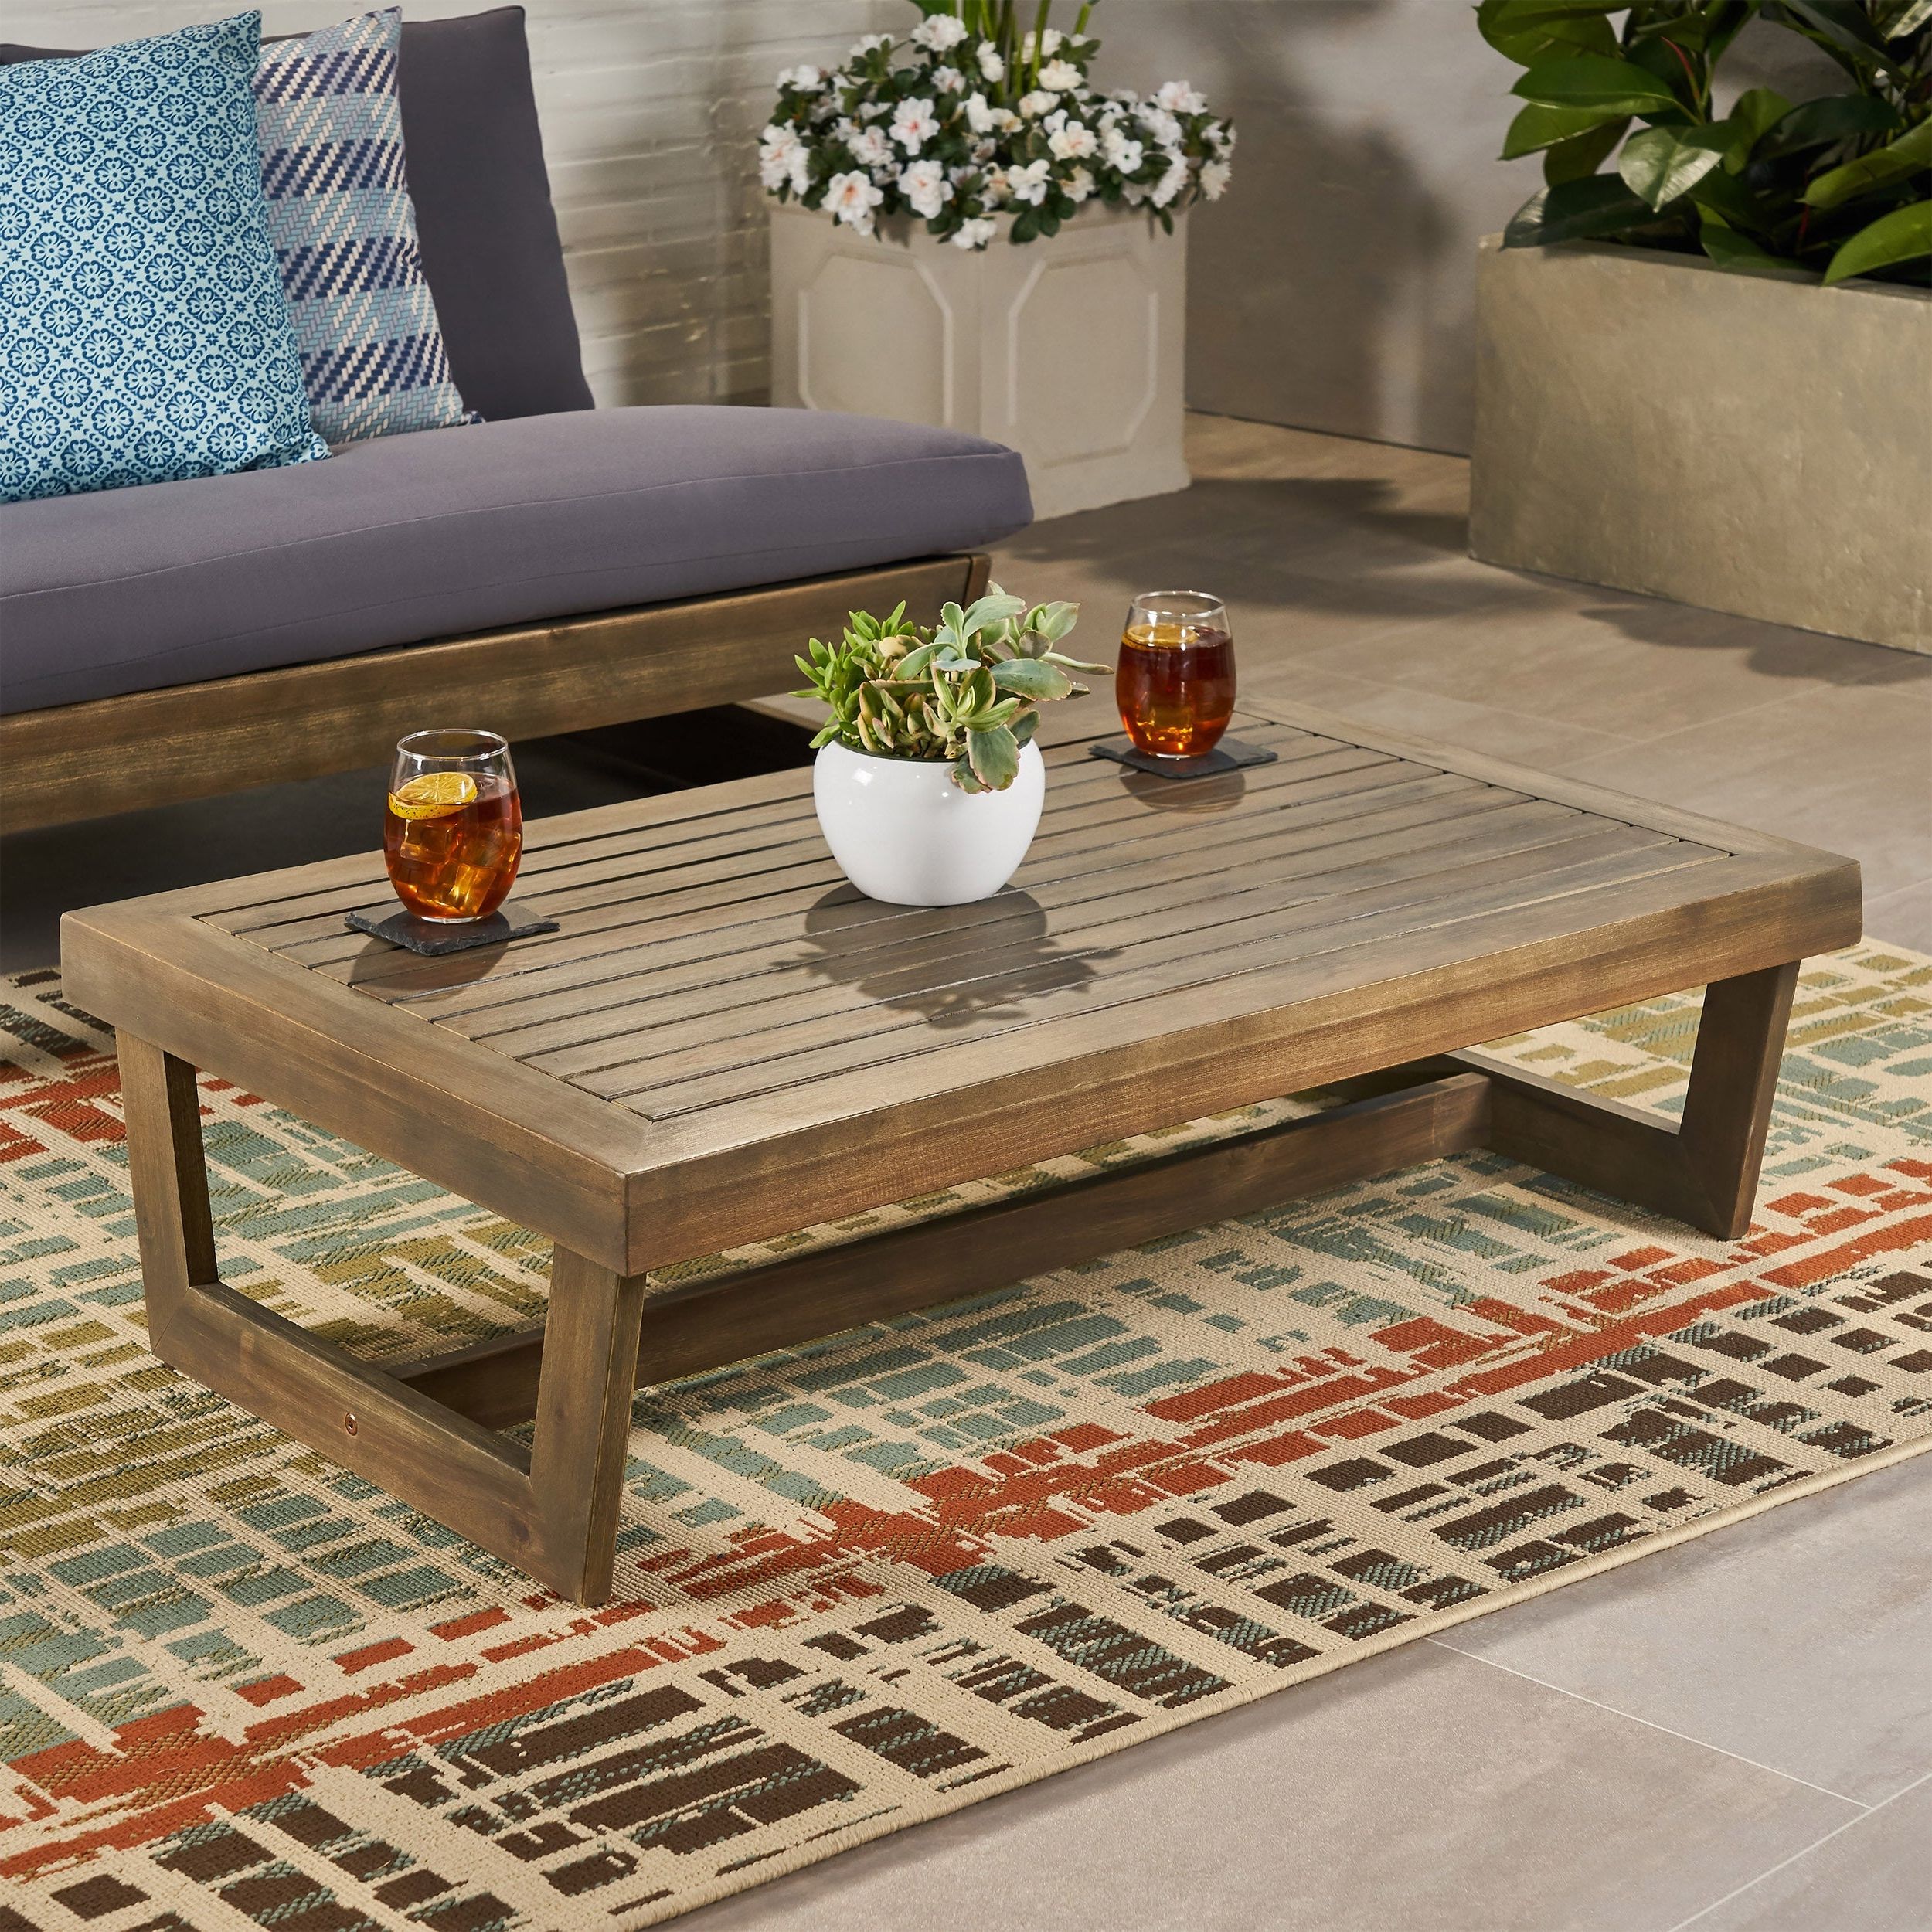 Sherwood Outdoor Acacia Wood Coffee Tablechristopher Knight Home – On  Sale – Overstock – 28422818 With Regard To Most Up To Date Acacia Wood Coffee Tables (View 11 of 20)